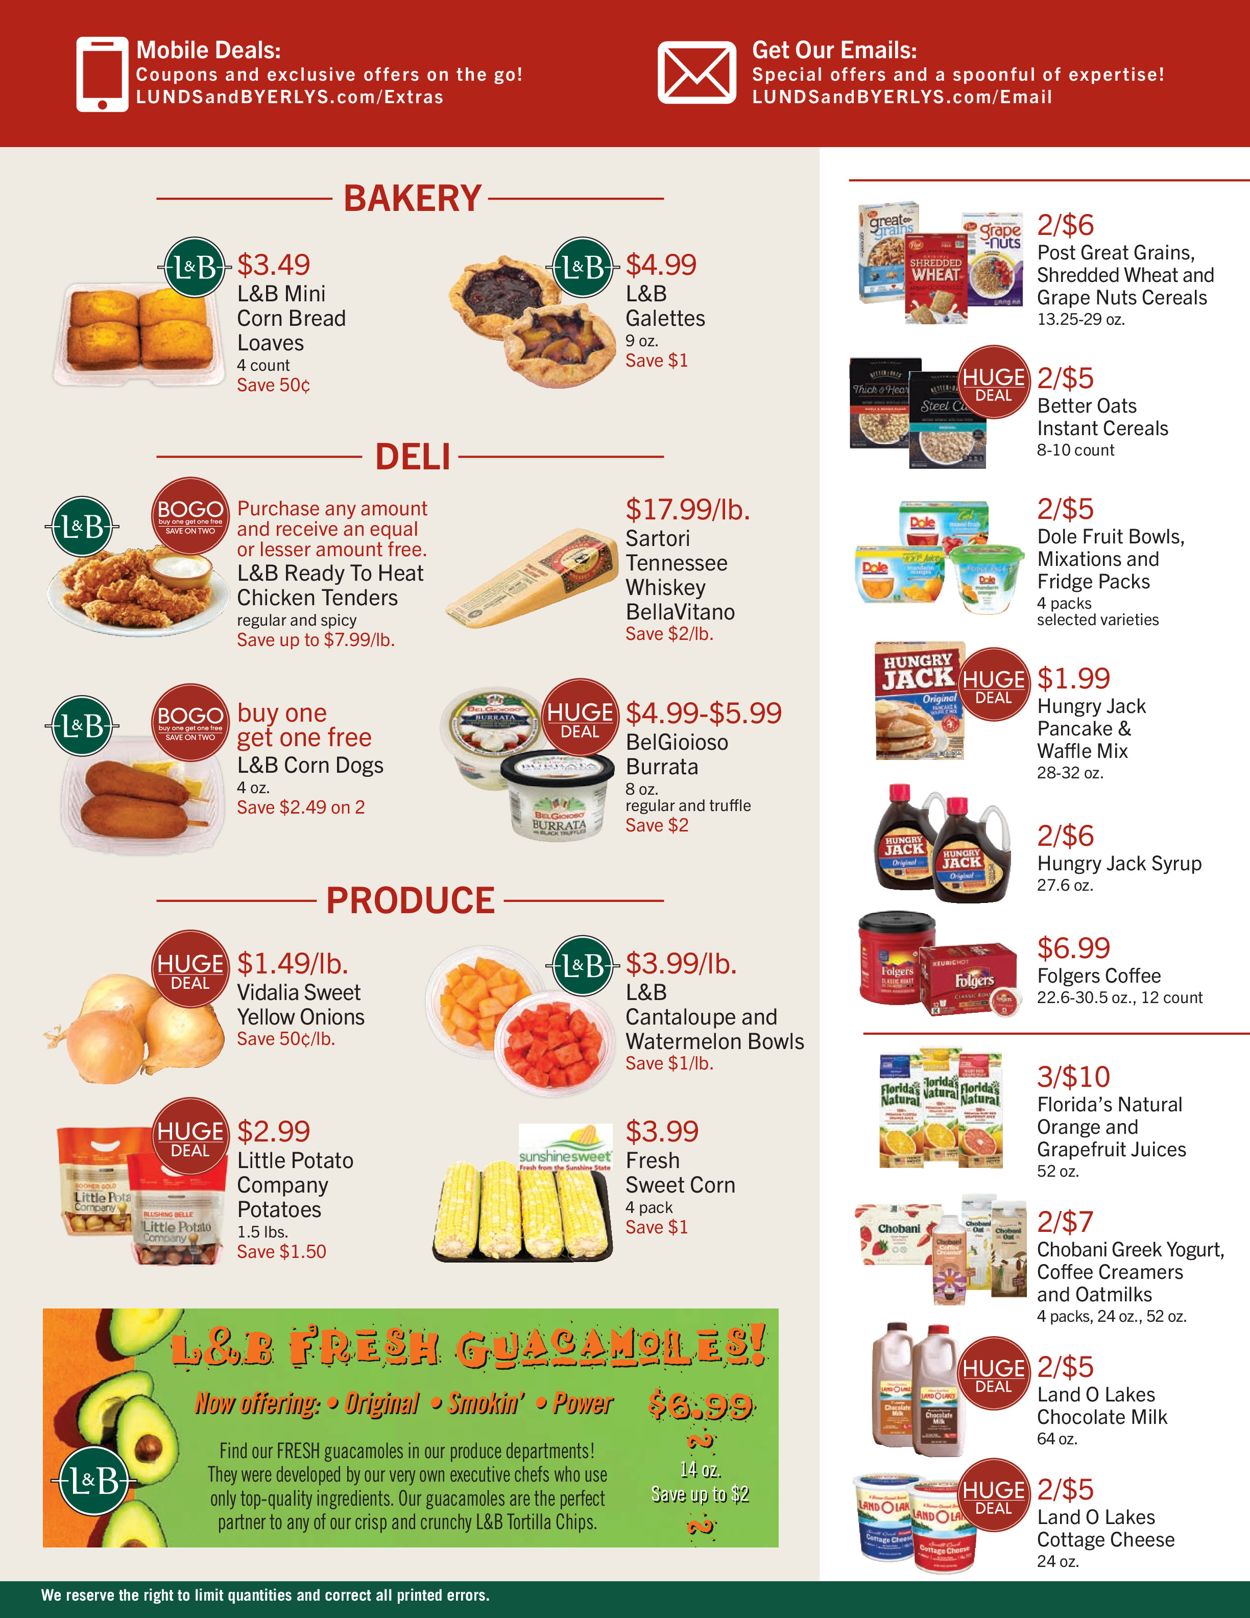 Catalogue Lunds & Byerlys from 04/29/2021